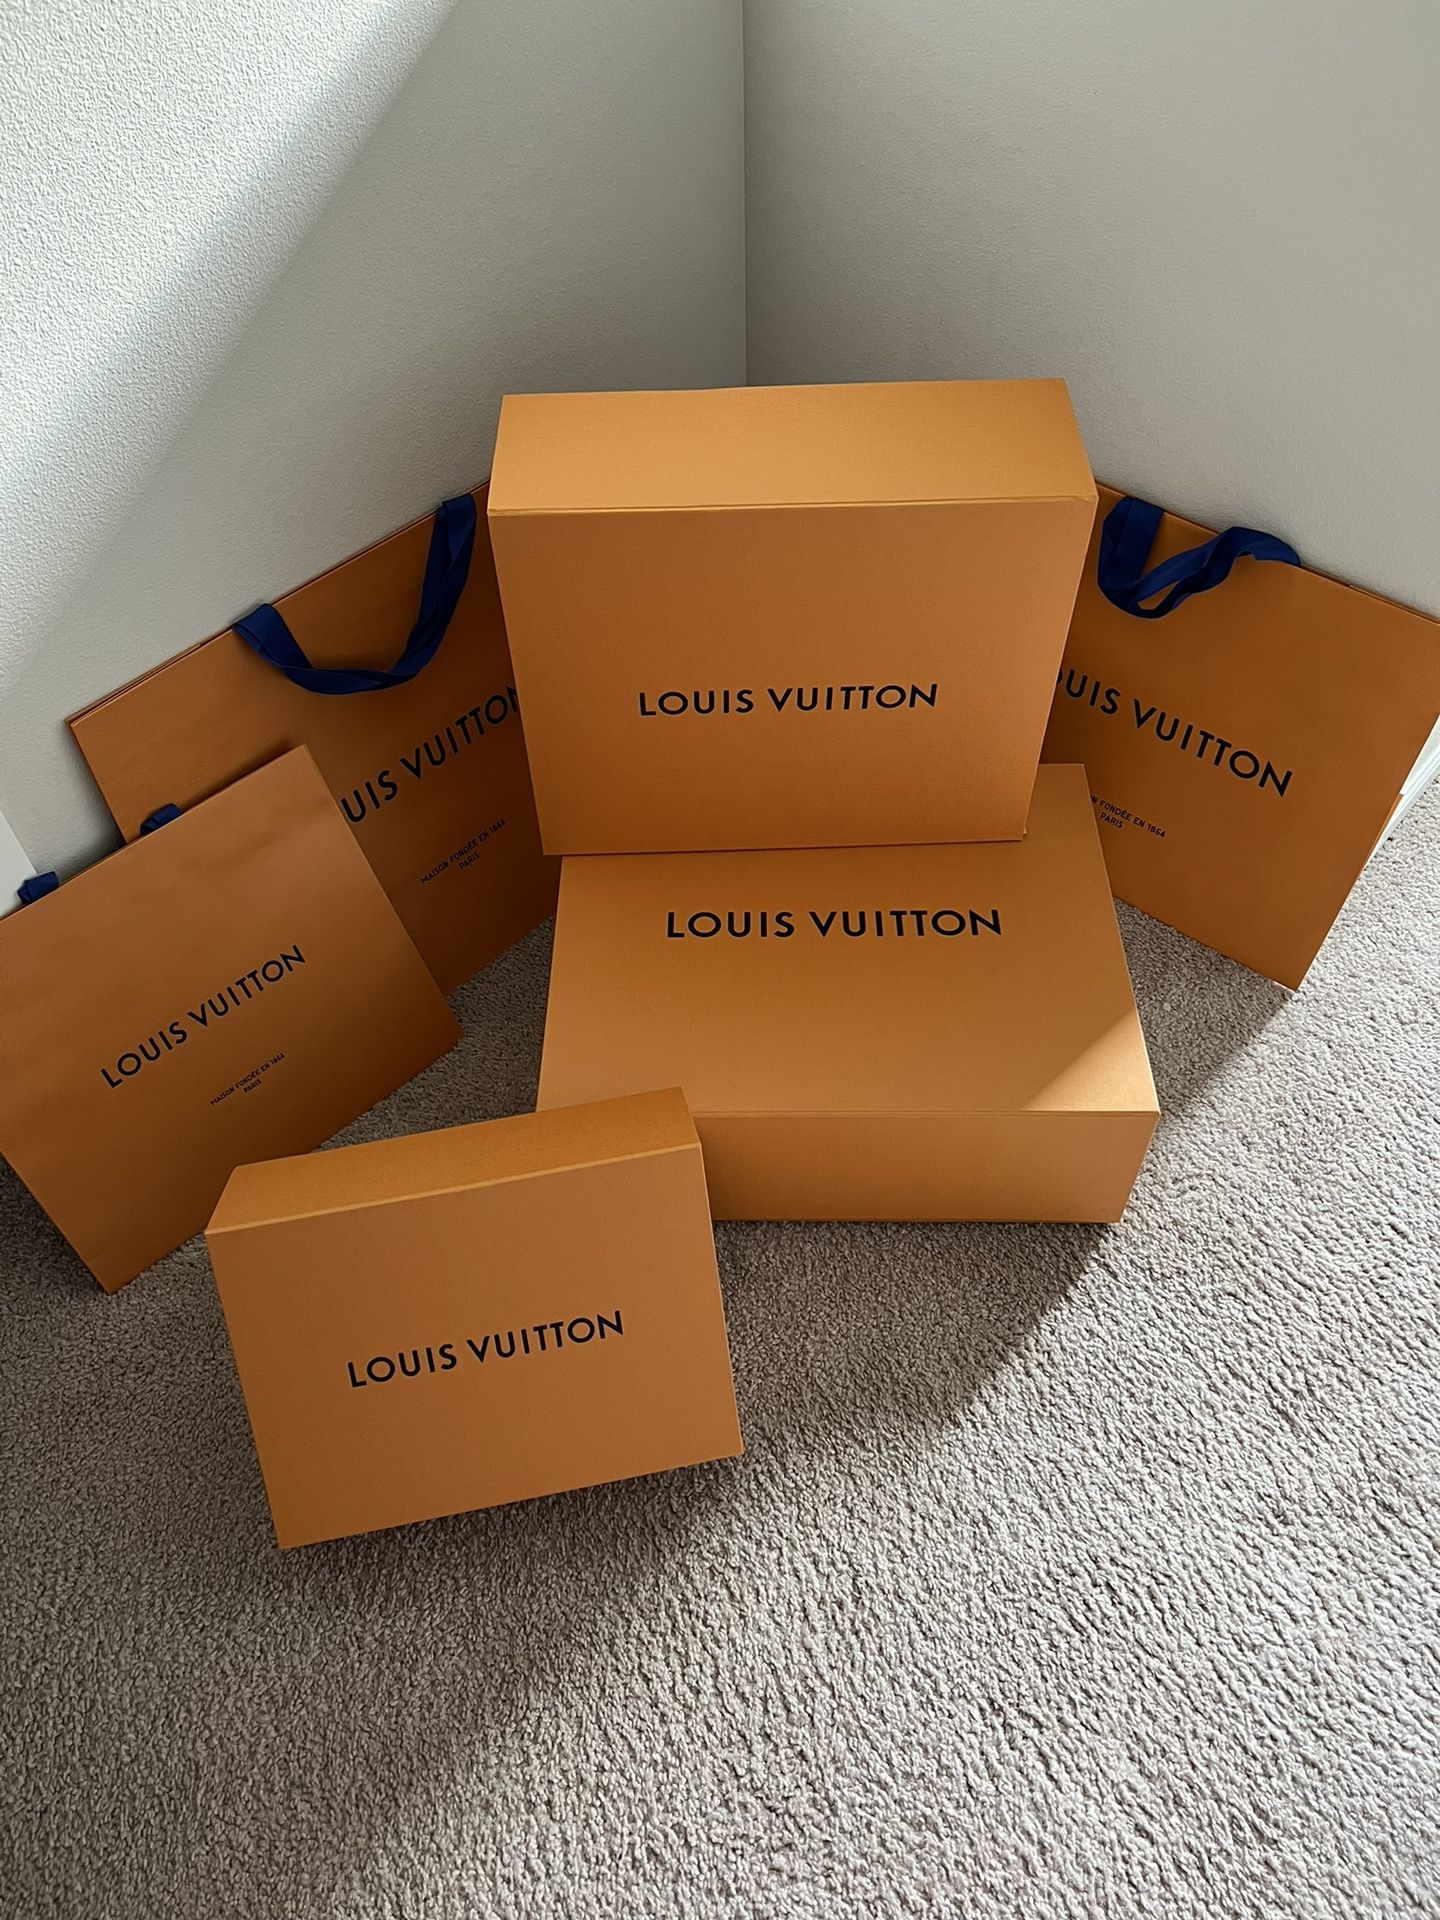 Louis Vuitton Boxes And Shopping Bags!